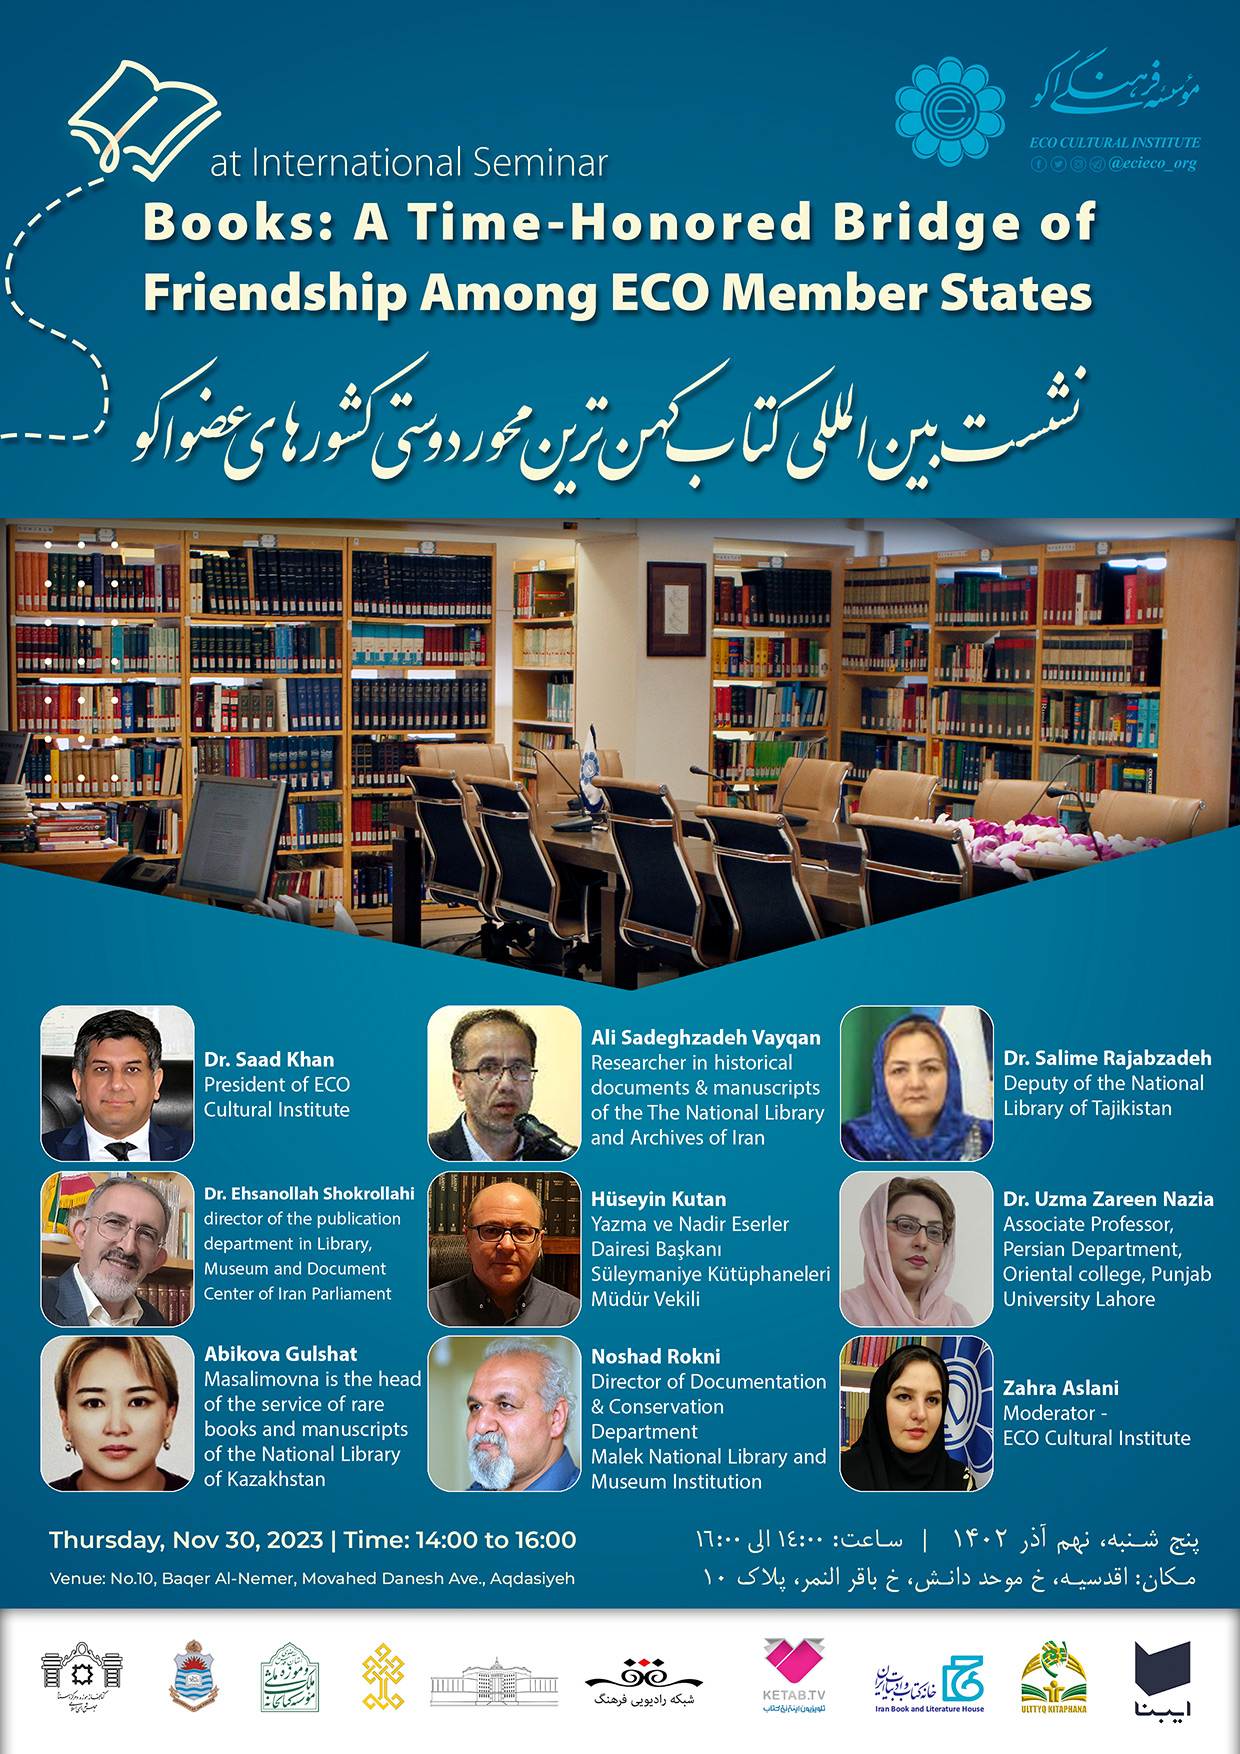 "Books: A Time - Honored Bridge of Friendship Among ECO Member States"